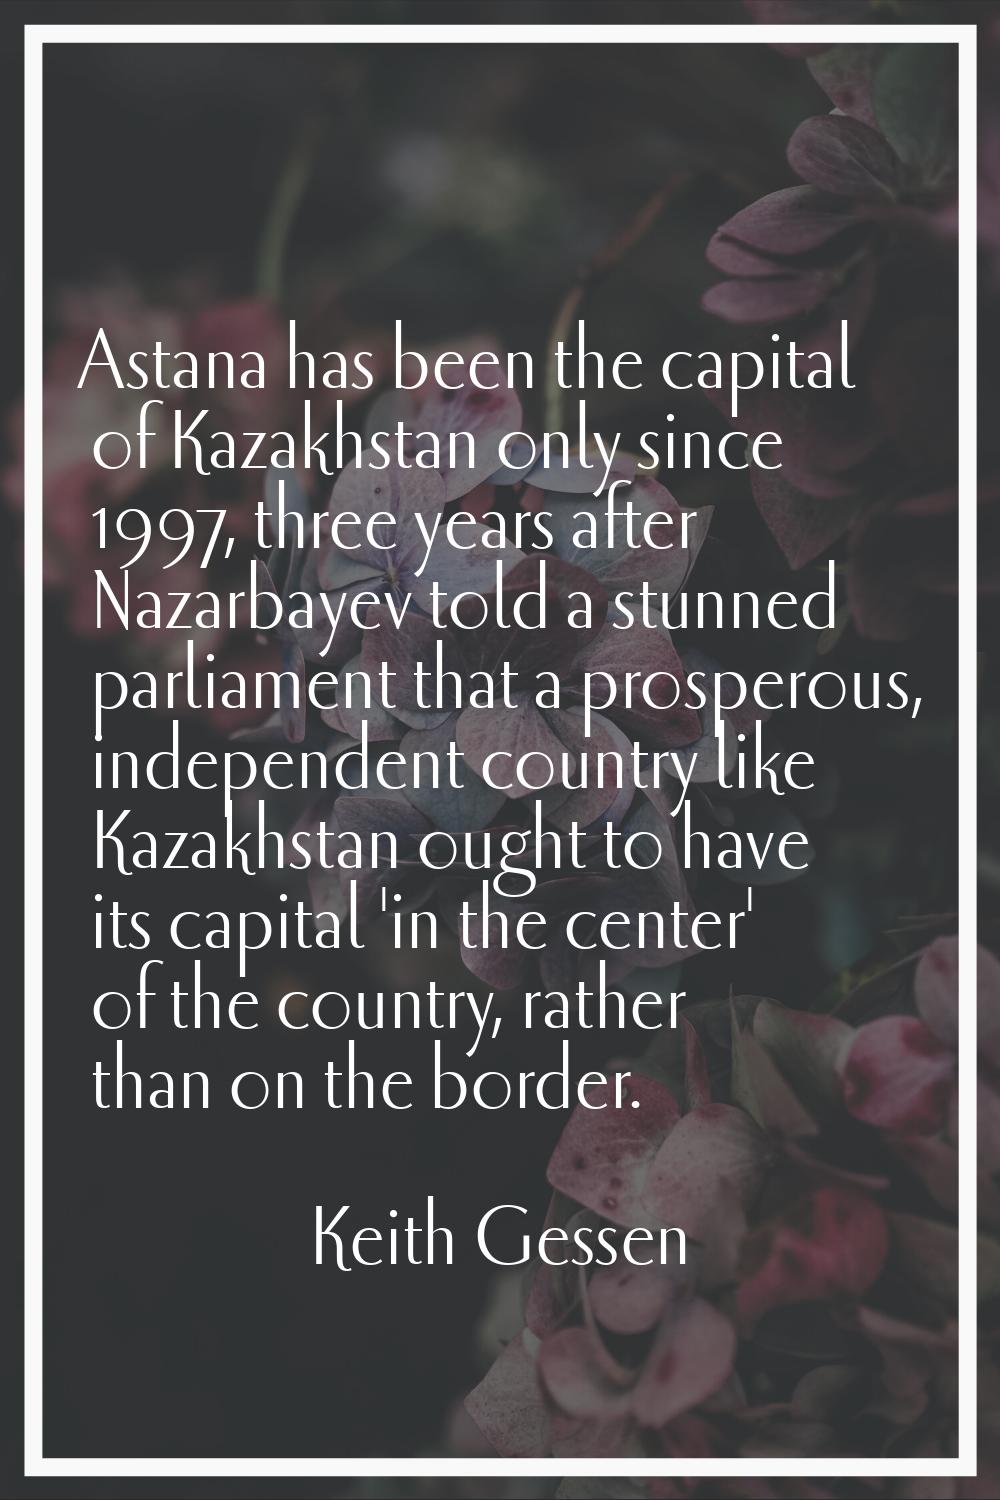 Astana has been the capital of Kazakhstan only since 1997, three years after Nazarbayev told a stun